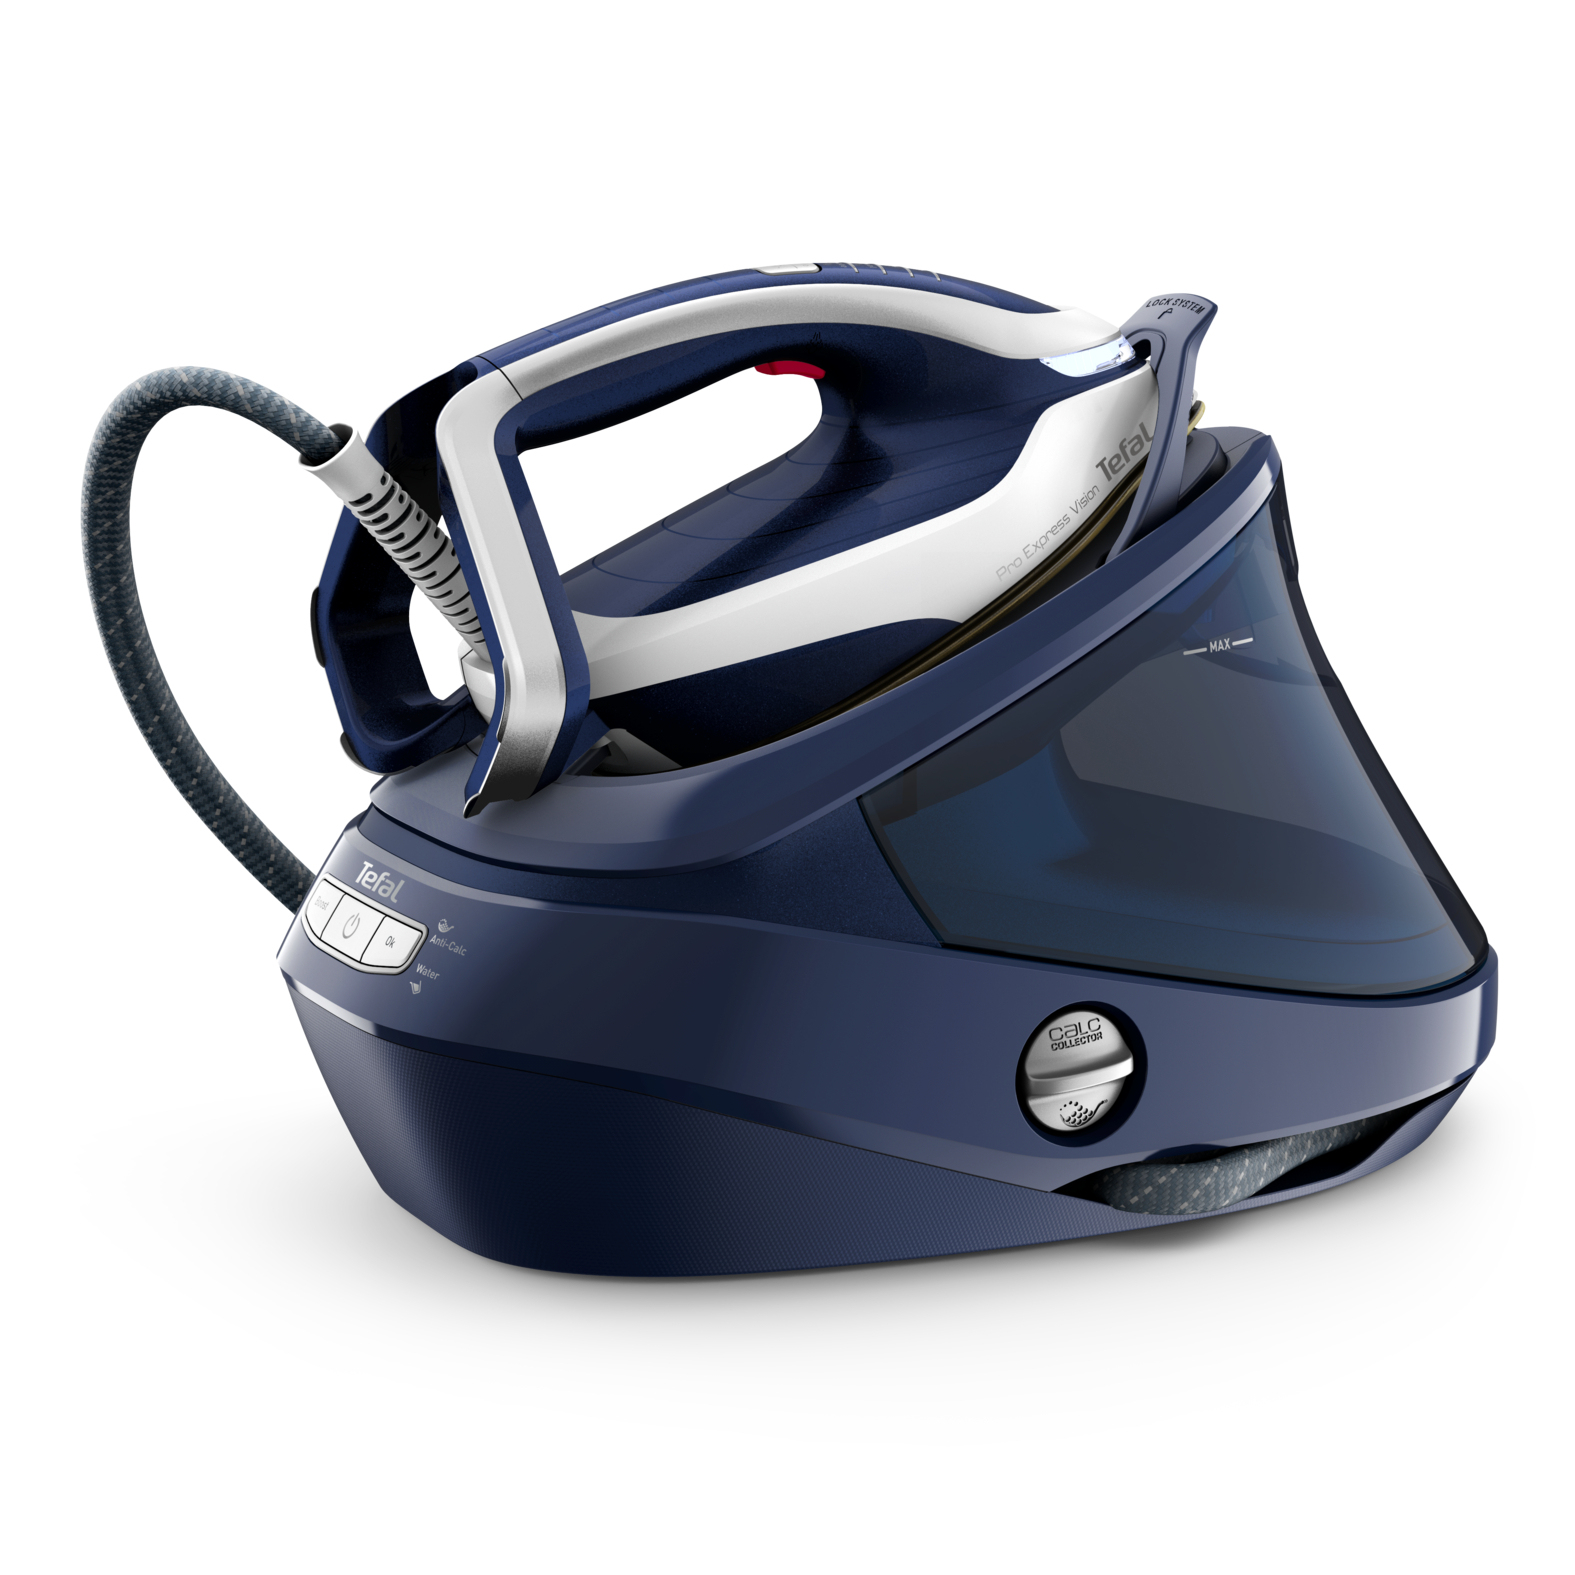 TEFAL Pro Express Vision GV9812 - 3000 W - 700 g/min - Durilium AirGlide Autoclean soleplate - 8,1 b